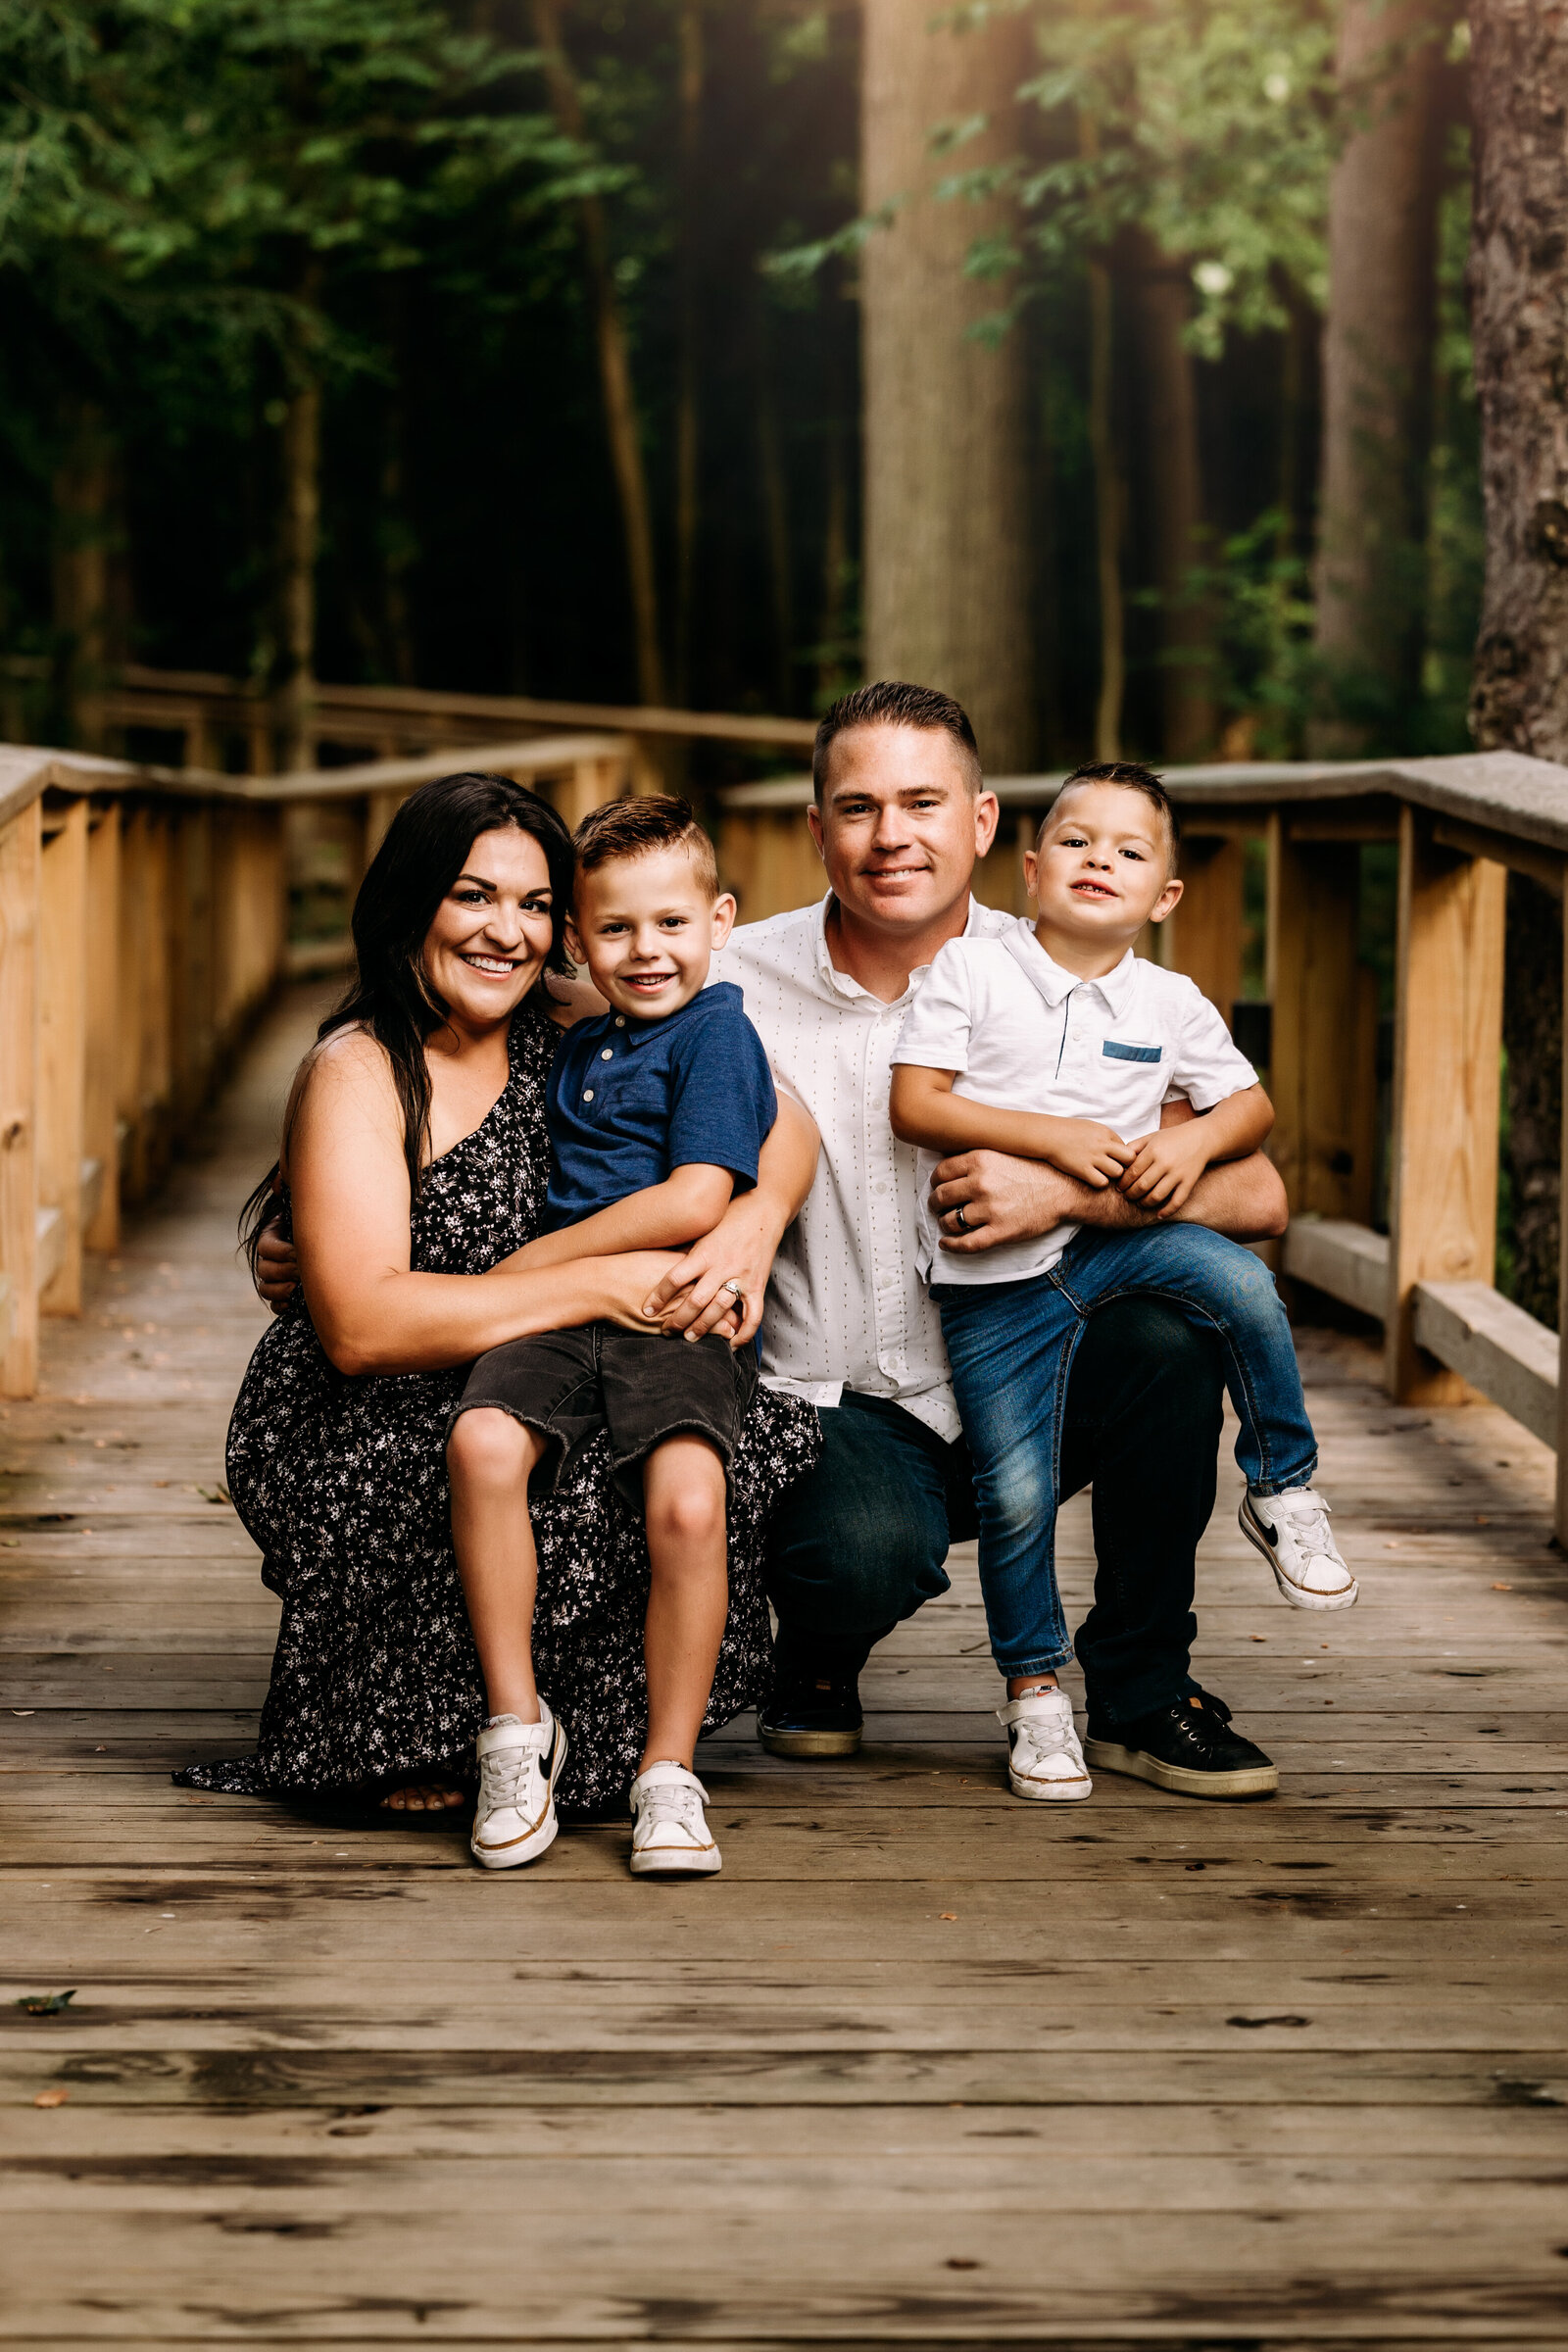 Mother and father snuggle up with their 2 boys along a wooden walkway